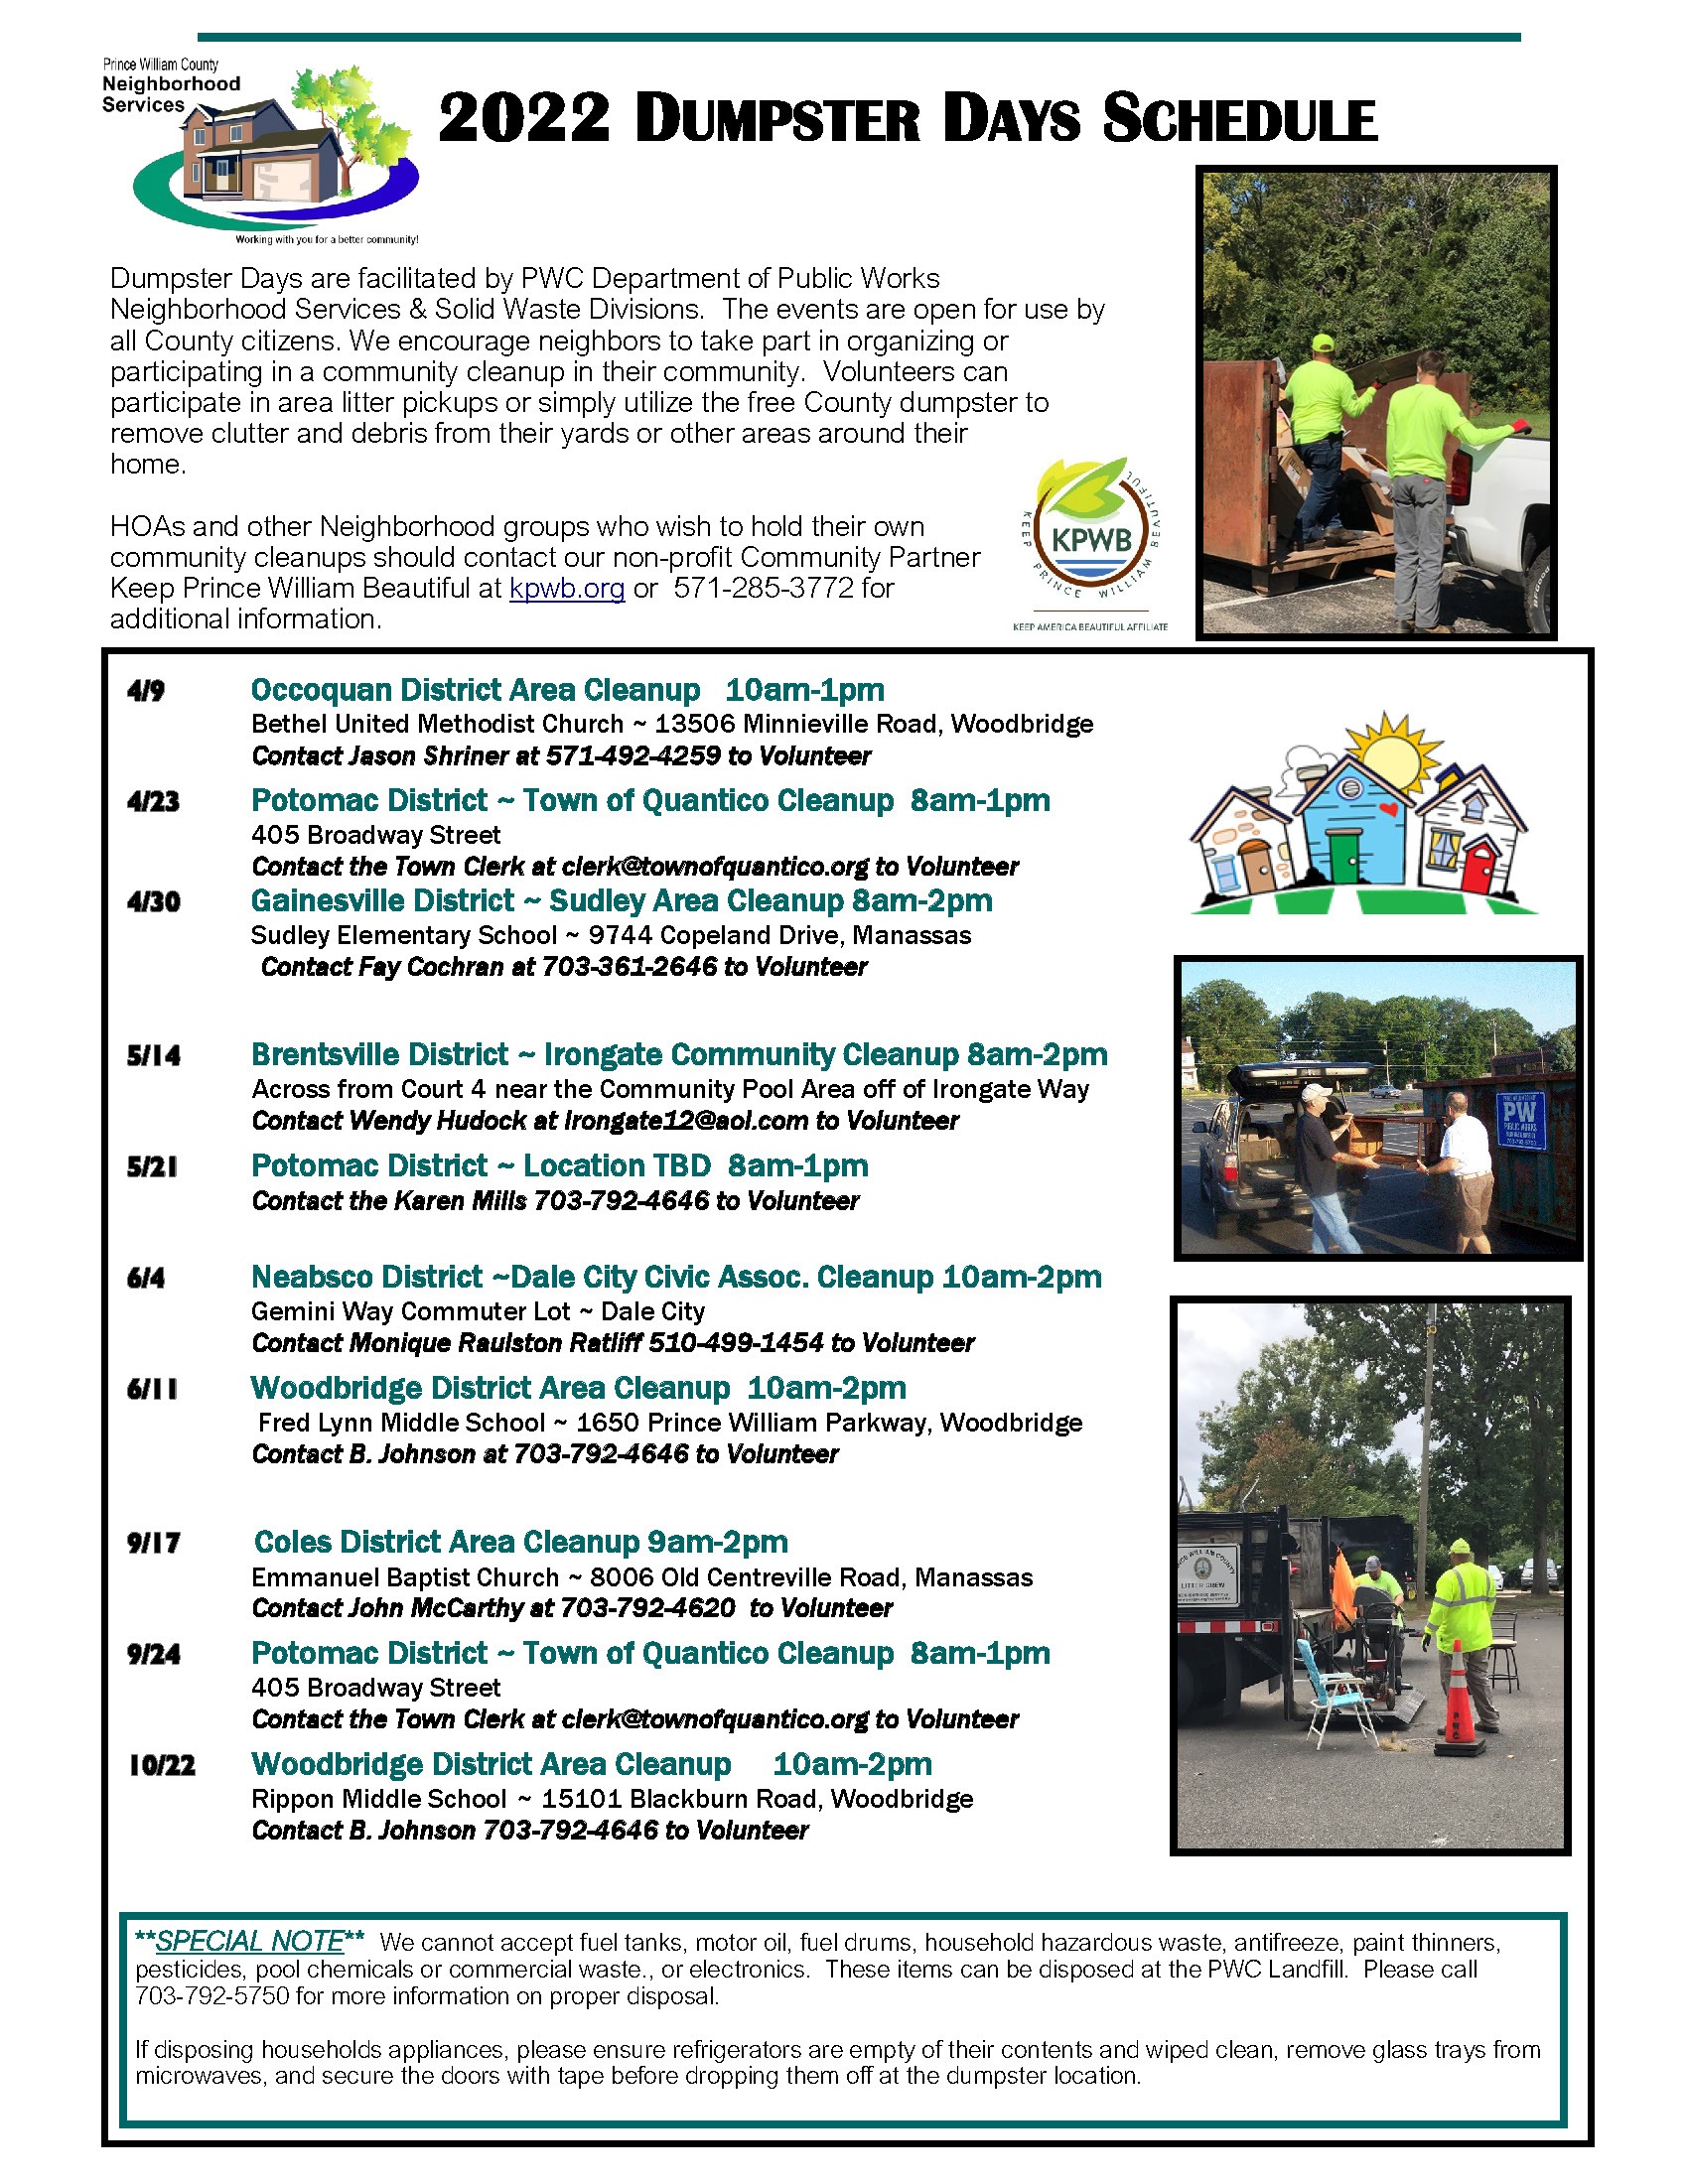 Dumpster Days Schedule 2022 FINAL - 2022 DUMPSTER DAYS: Occoquan District Area Cleanup